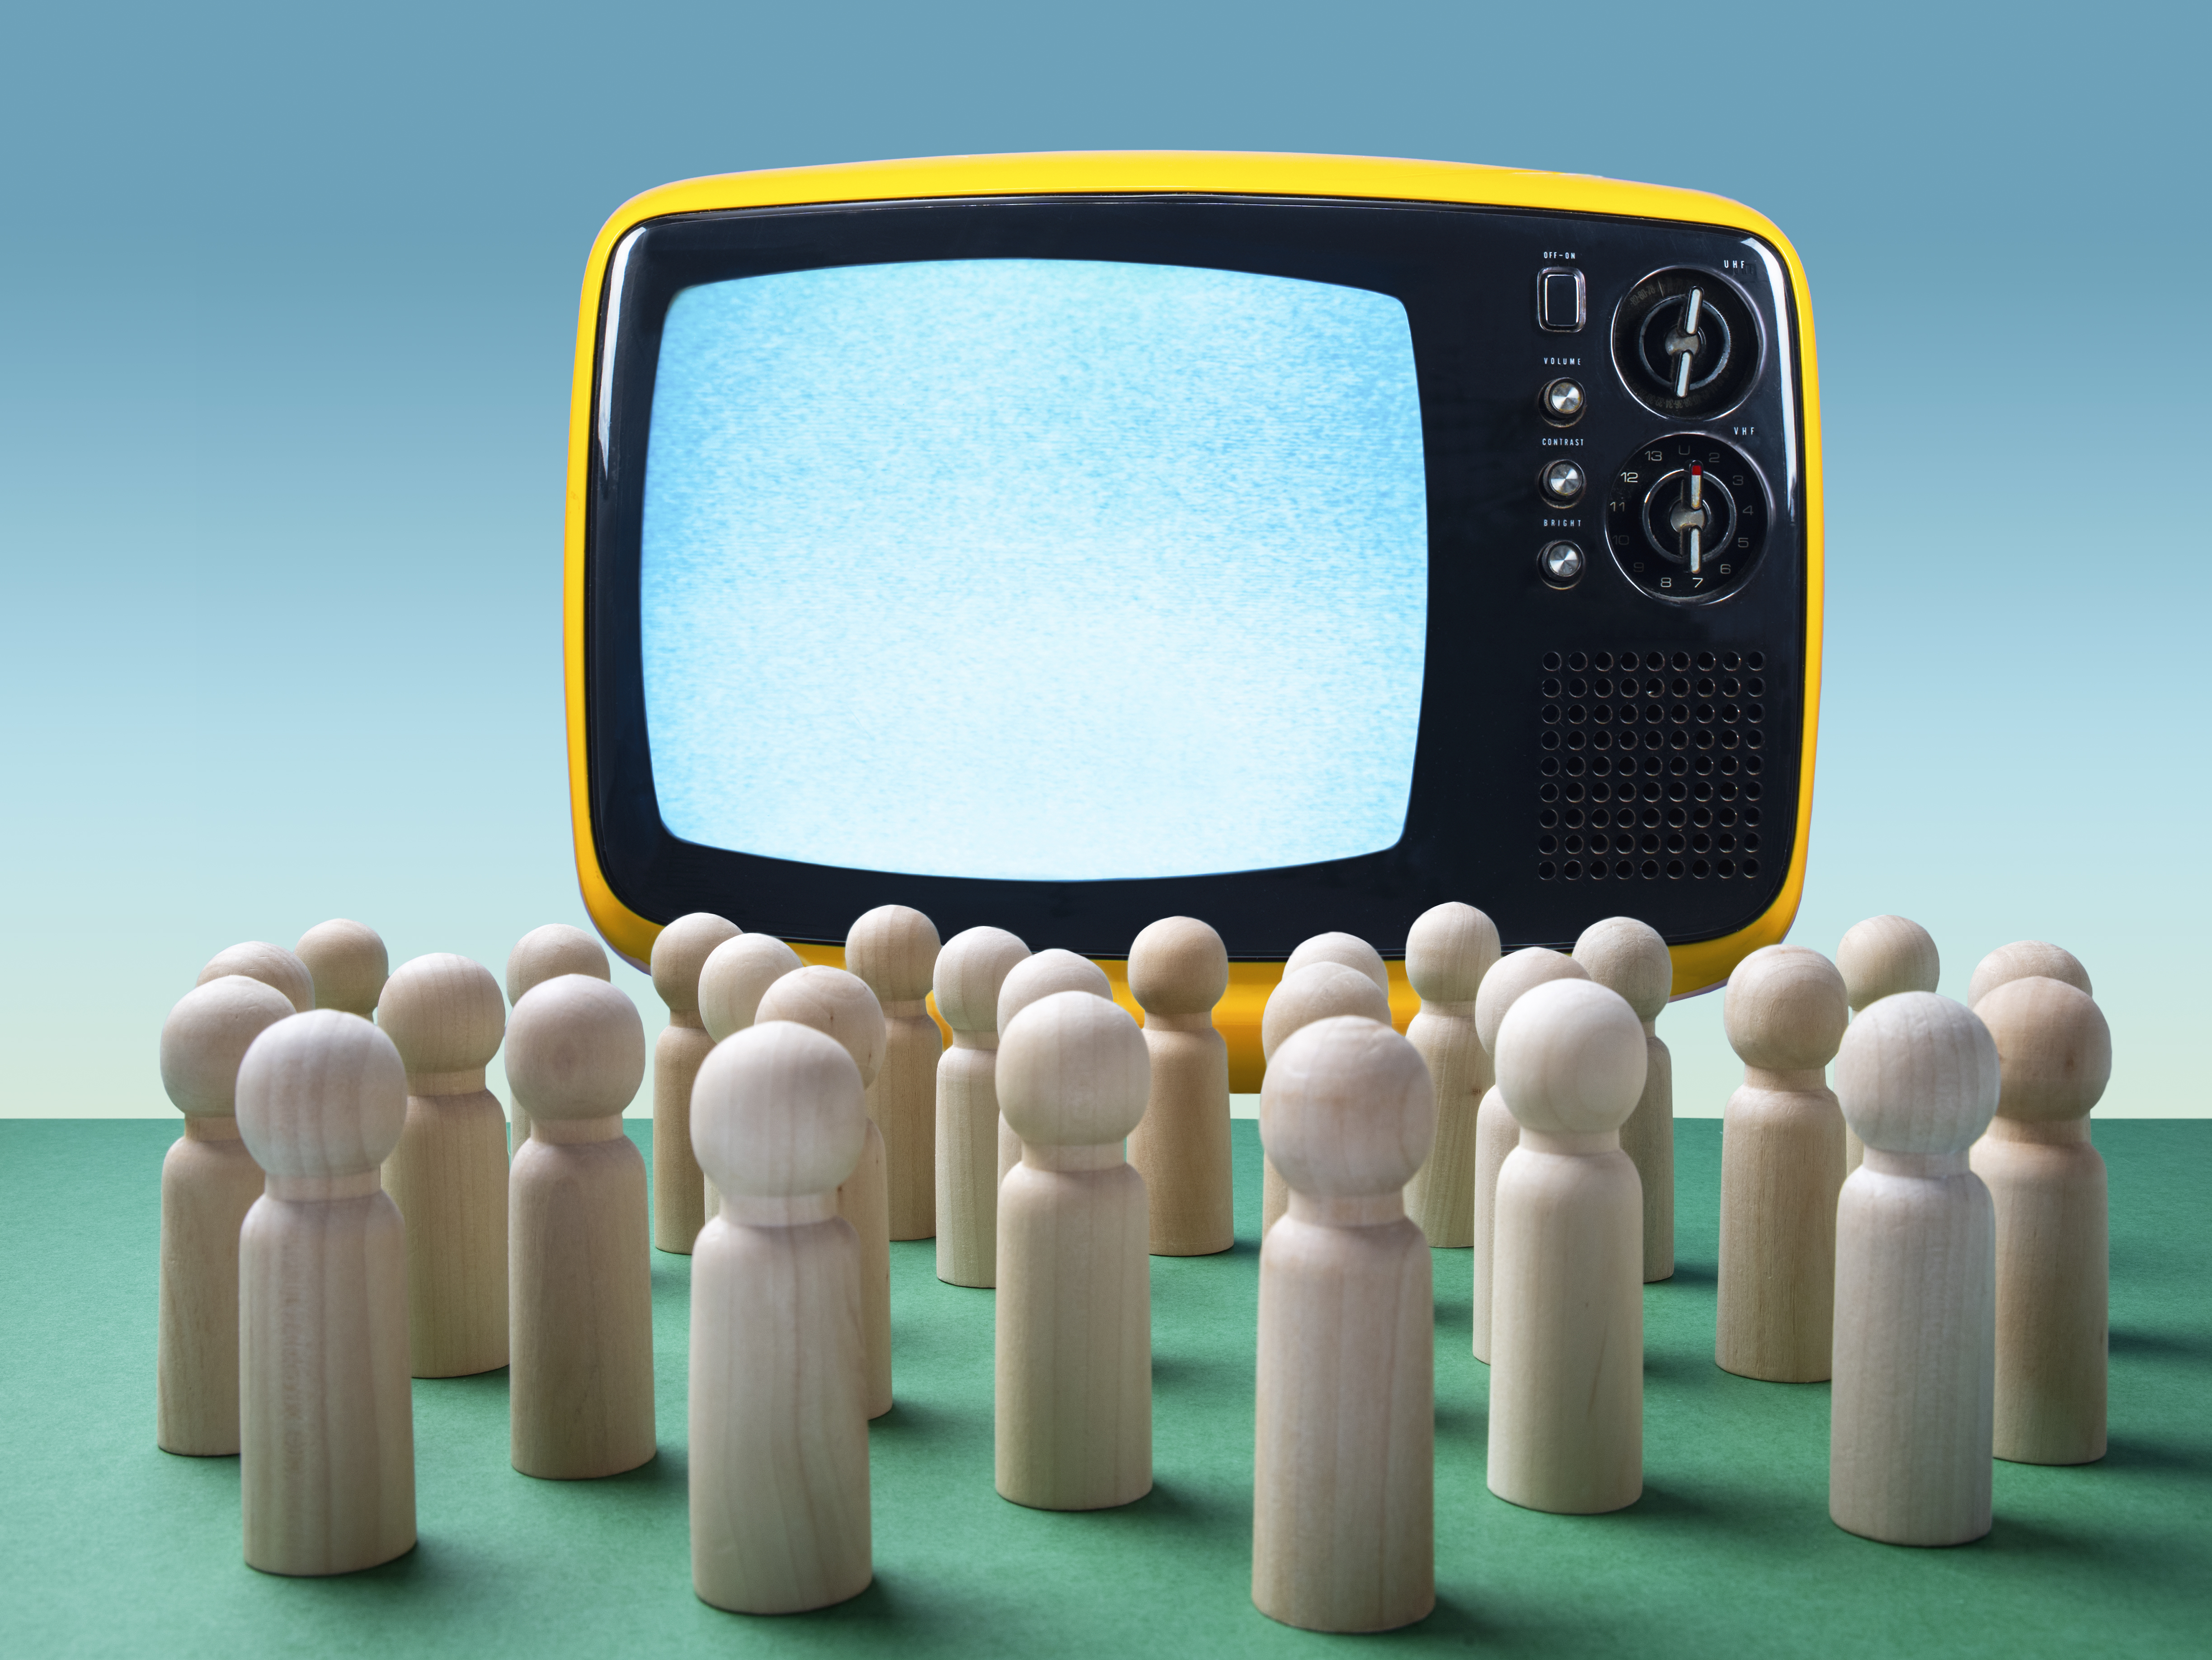 Wooden figurines facing an empty old-school television.